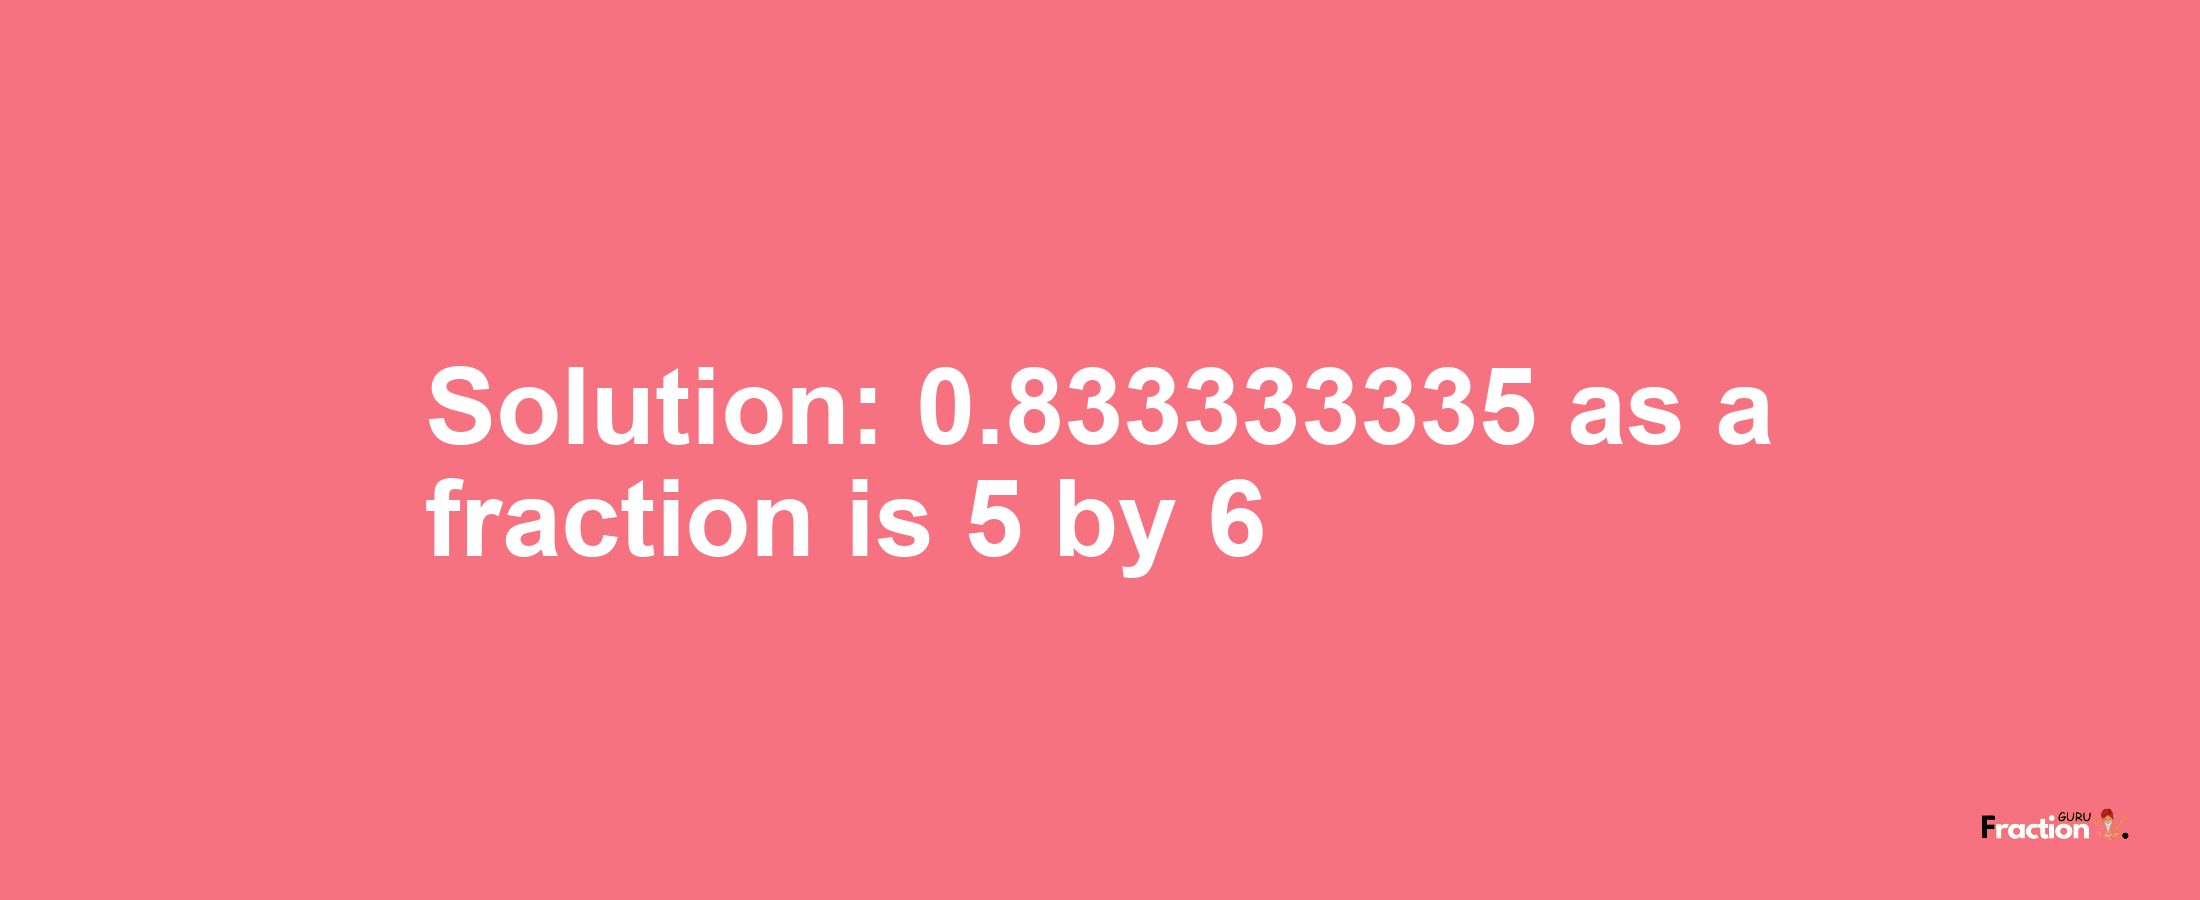 Solution:0.833333335 as a fraction is 5/6